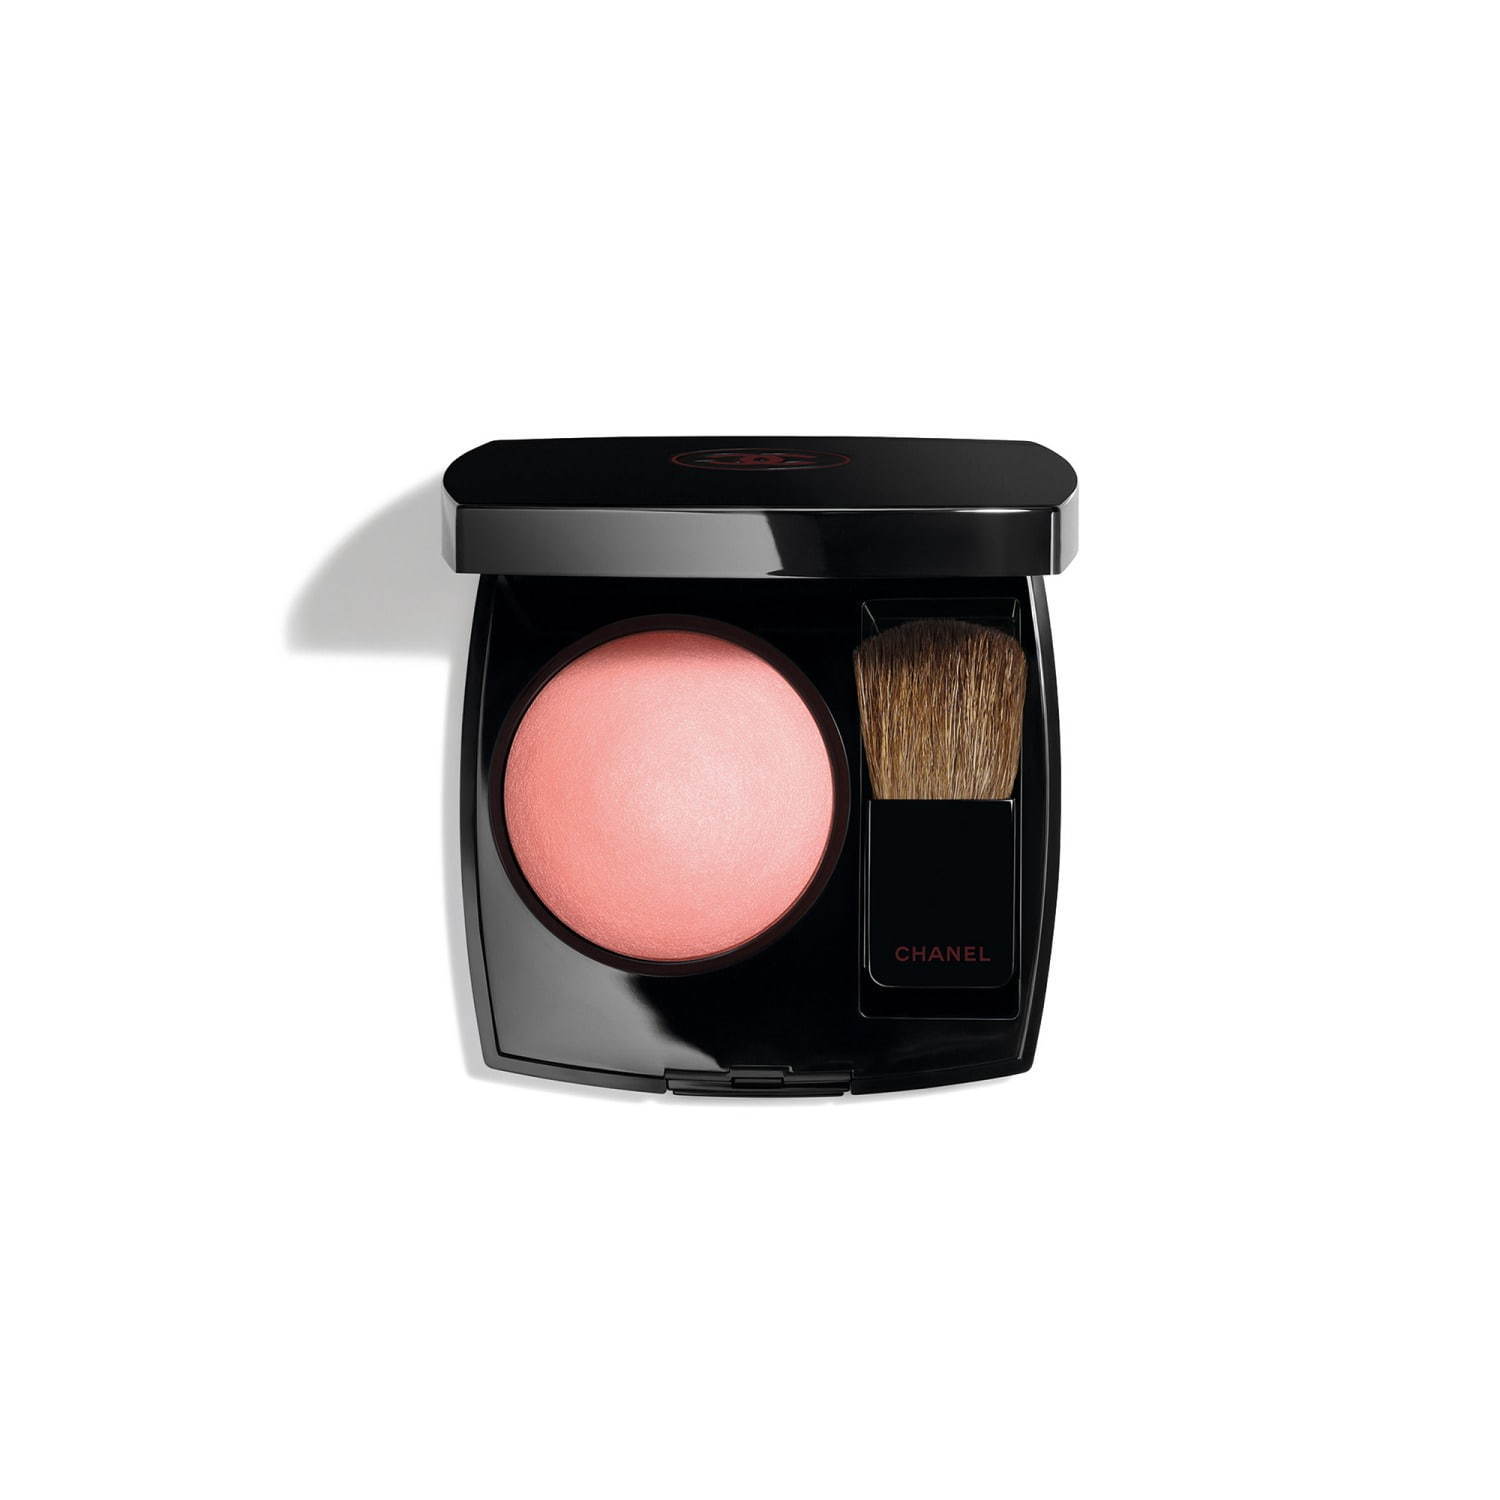 4 - CHANEL The popular Blush limited 2020